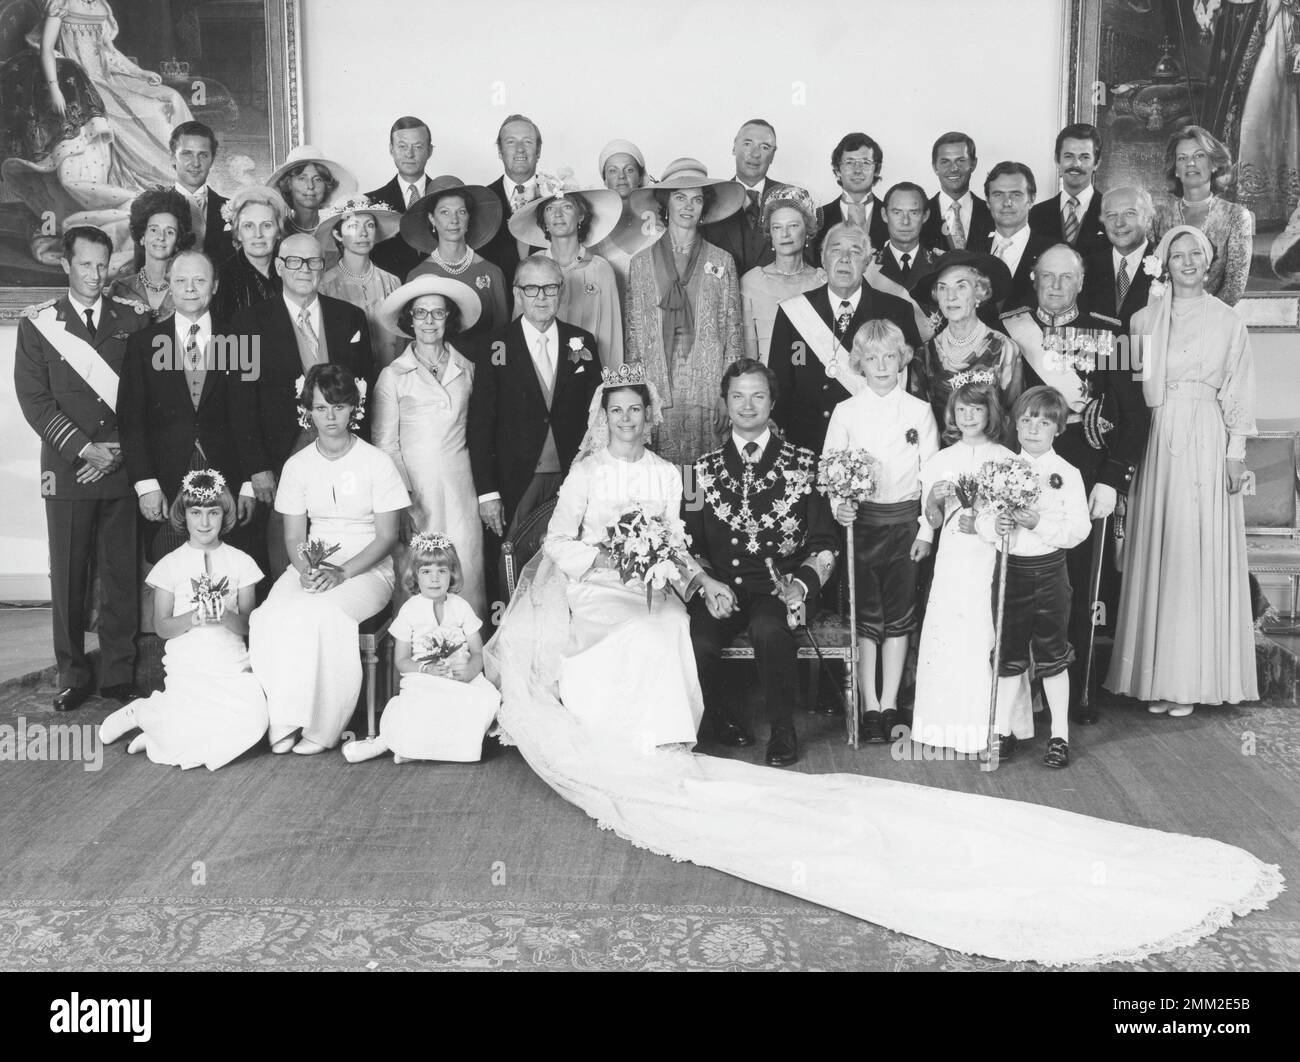 Wedding of Carl XVI Gustaf and Silvia Sommerlath. Carl XVI Gustaf, King of Sweden. Born 30 april 1946. The wedding 19 june 1976 in Stockholm.   King Carl the XVI Gustaf and Queen Silvia are newlyweds and sit in the middle of the official wedding photo. Royalties from European royal houses and Swedish relatives participate. From left King Baudouin of Belgium, Queen Fabiola, President Kekkonen, Princess Christina, Niklas Silfverskiöld, Princess Désirée, Alice Sommerlath, Walter, Sommerlath, Princess Birgitta, Princess Margaretha, John Ambler, Joesphine Charlotte, Tord Magnuson, Prince Bertil, Ki Stock Photo